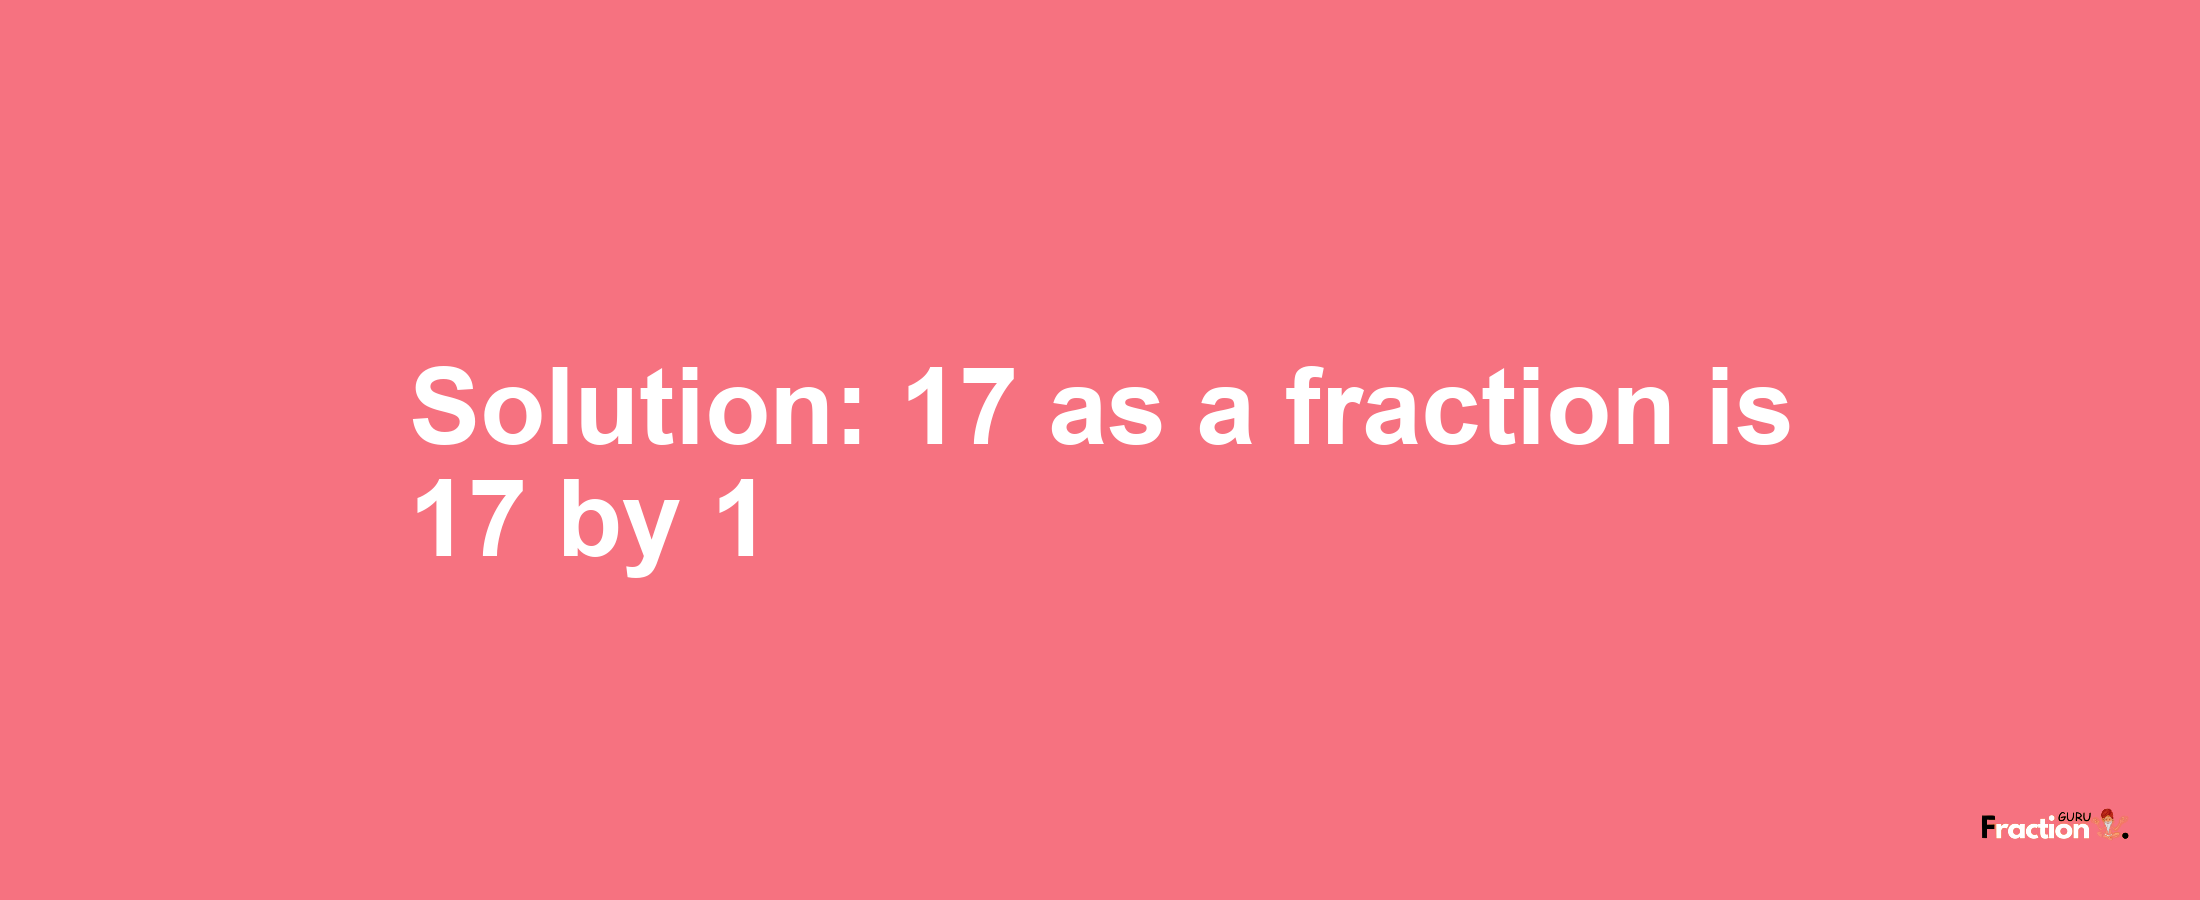 Solution:17 as a fraction is 17/1